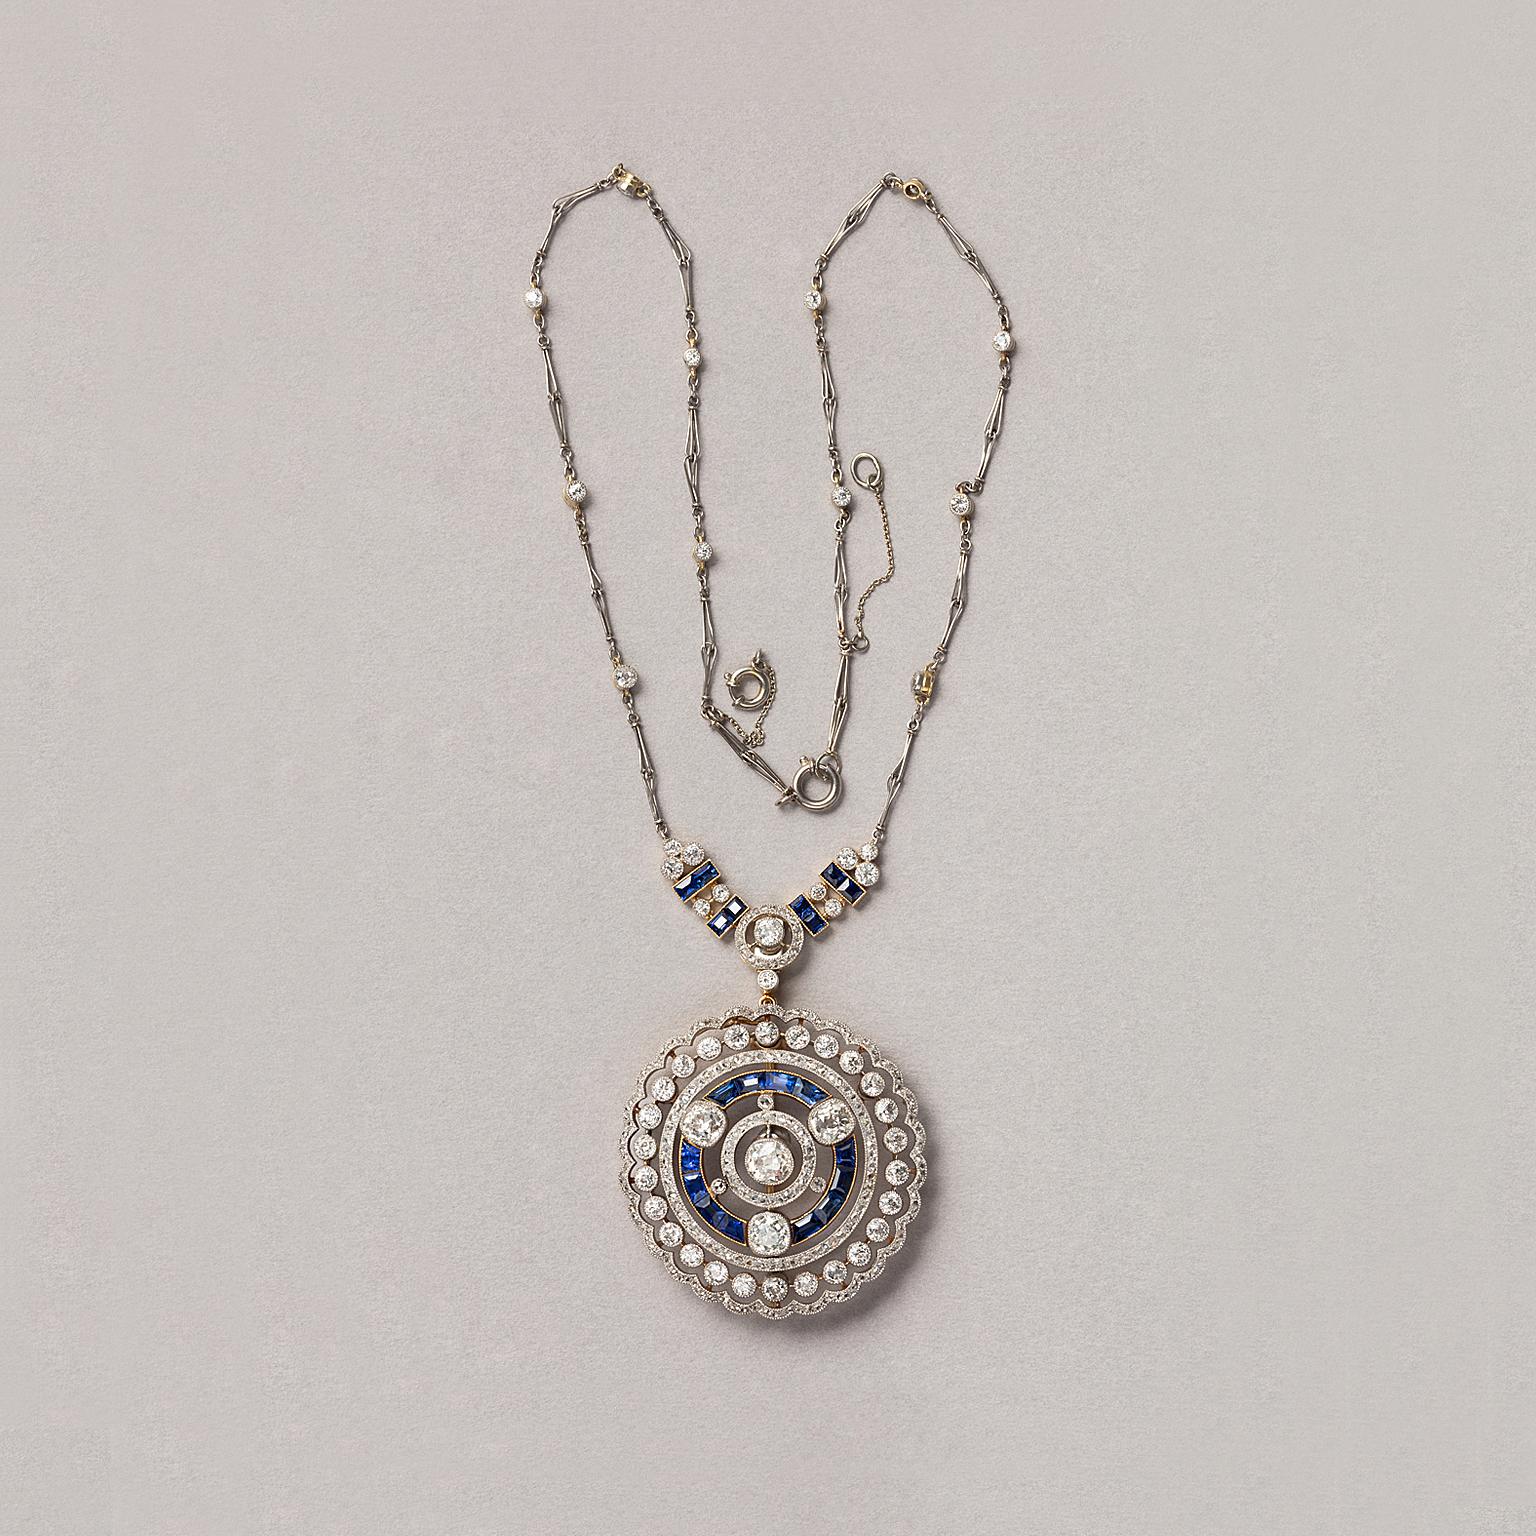 An 18 carat yellow gold and platinum Edwardian brooch or pendant and necklace, a round pendant with several circles mille griffe set with old and rose cut diamonds (app. 5.25 carat) and with tapered baguette cut sapphires. Around the center are